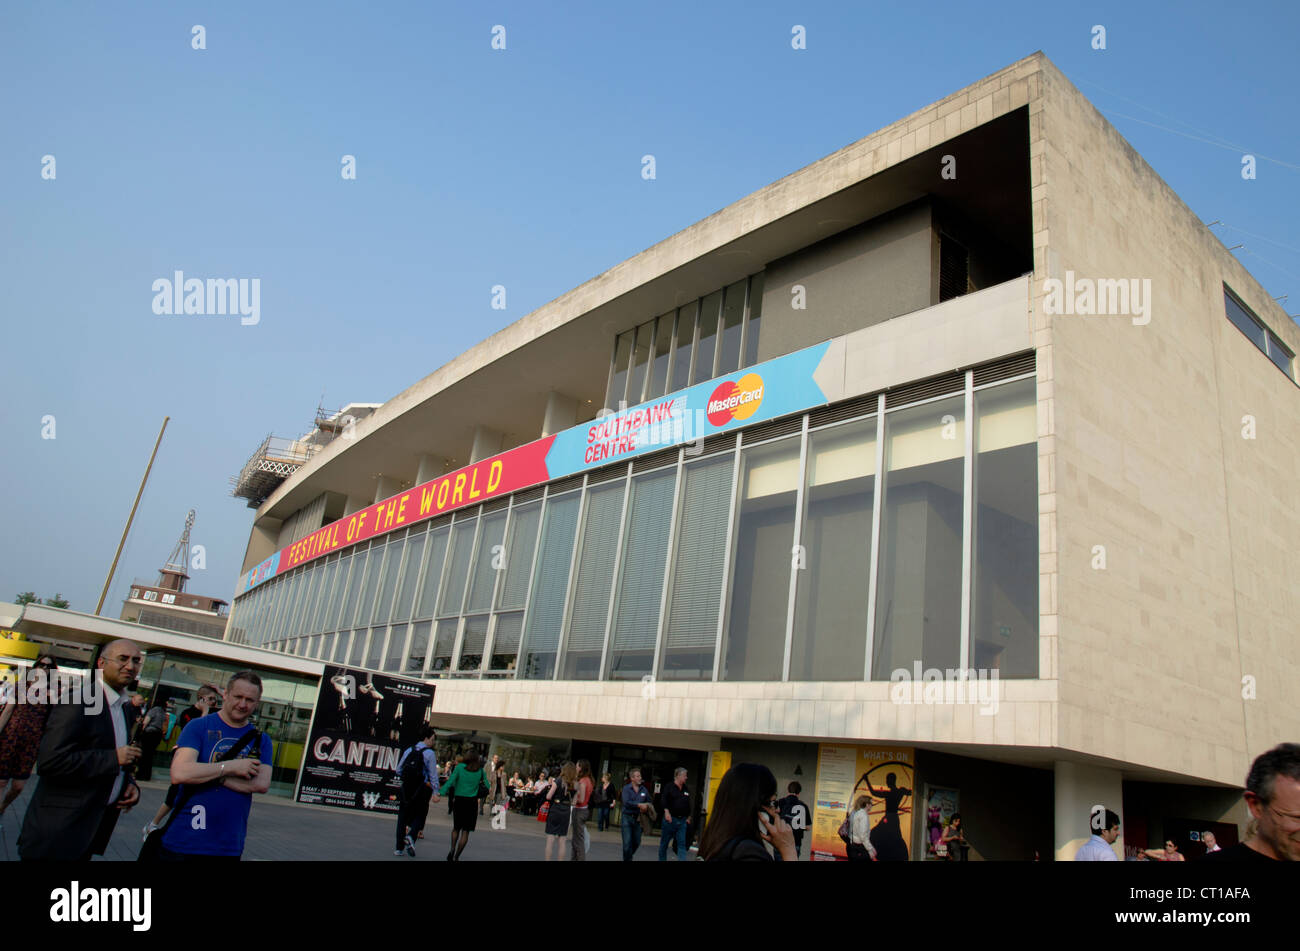 Southbank centre with festival of the world sign Stock Photo